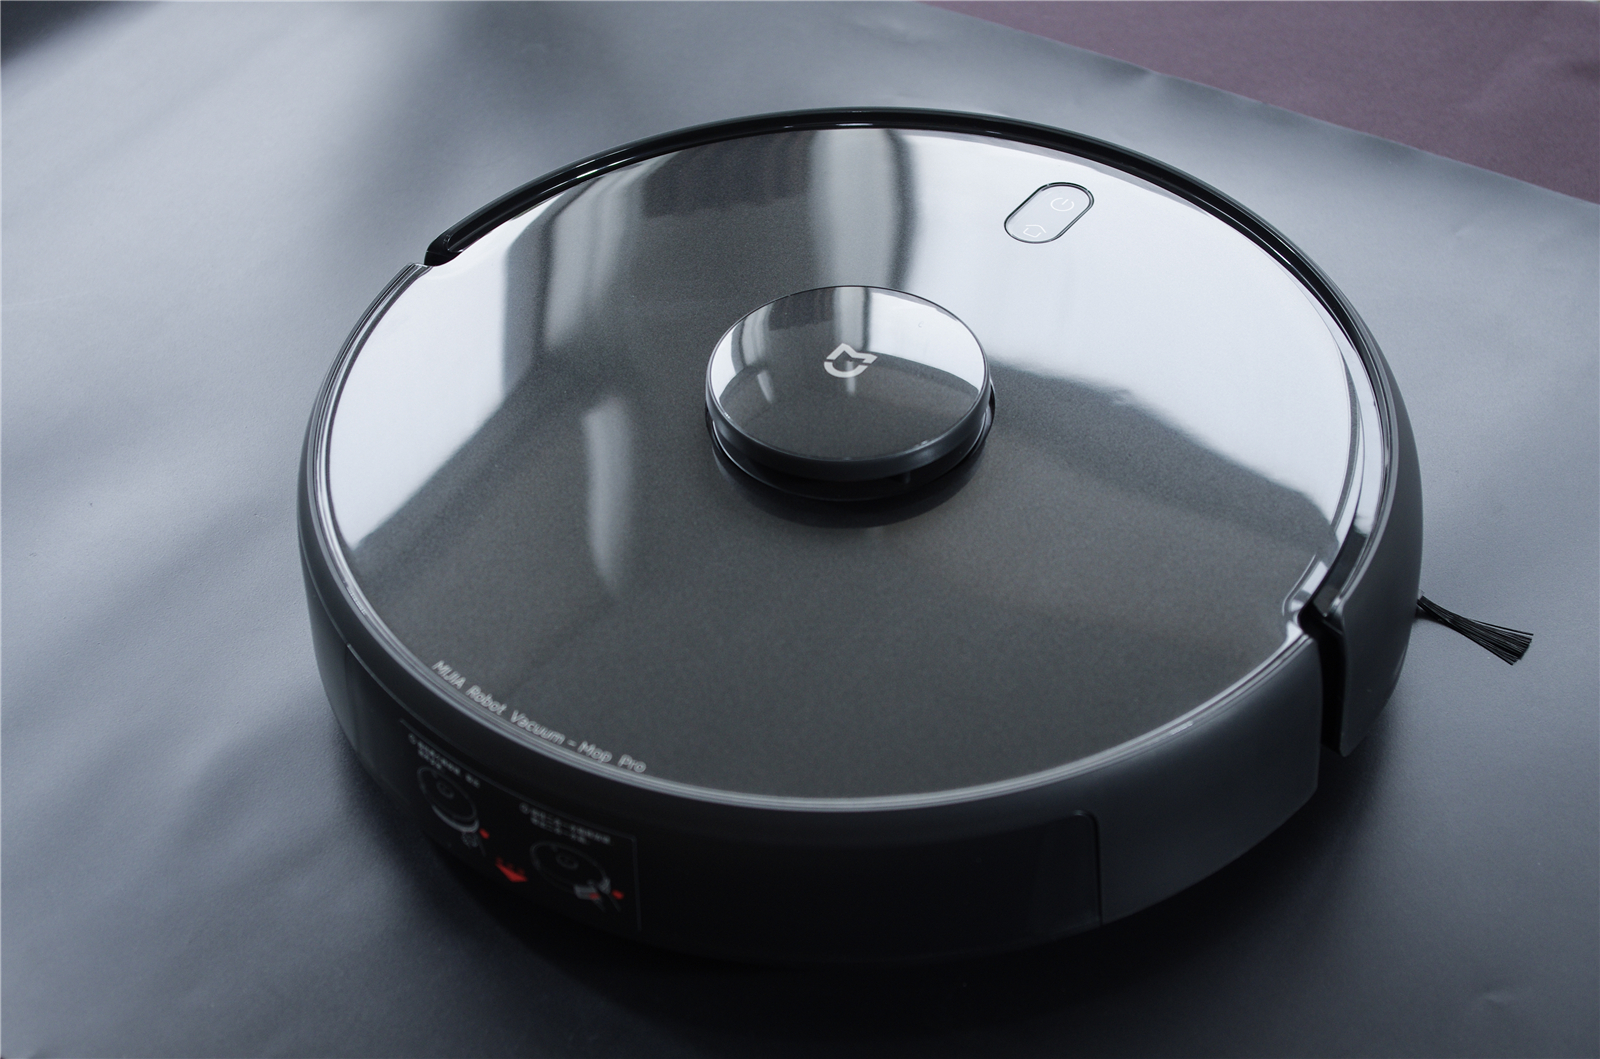 Mijia Sweeping Robot Pro Review: Free Your Hands to Avoid Obstacles Smartly